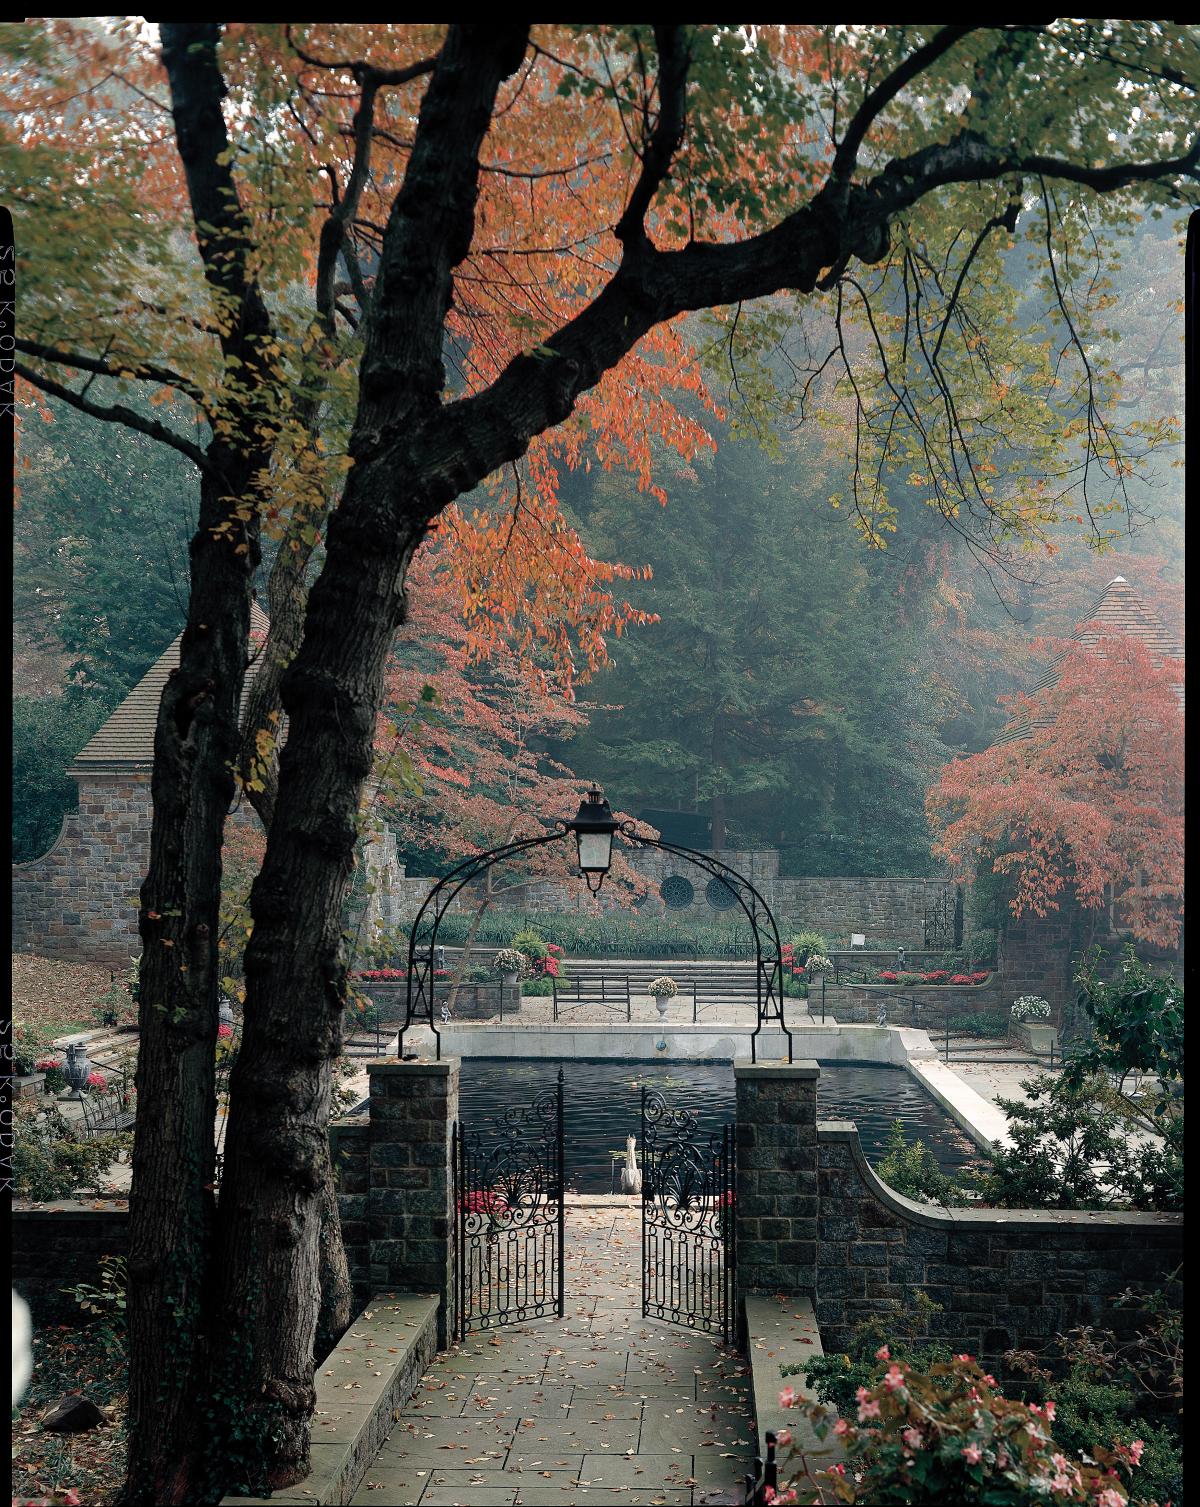 Photograph of an iron gate with lantern over it, leading into a pond area surrounded by stones